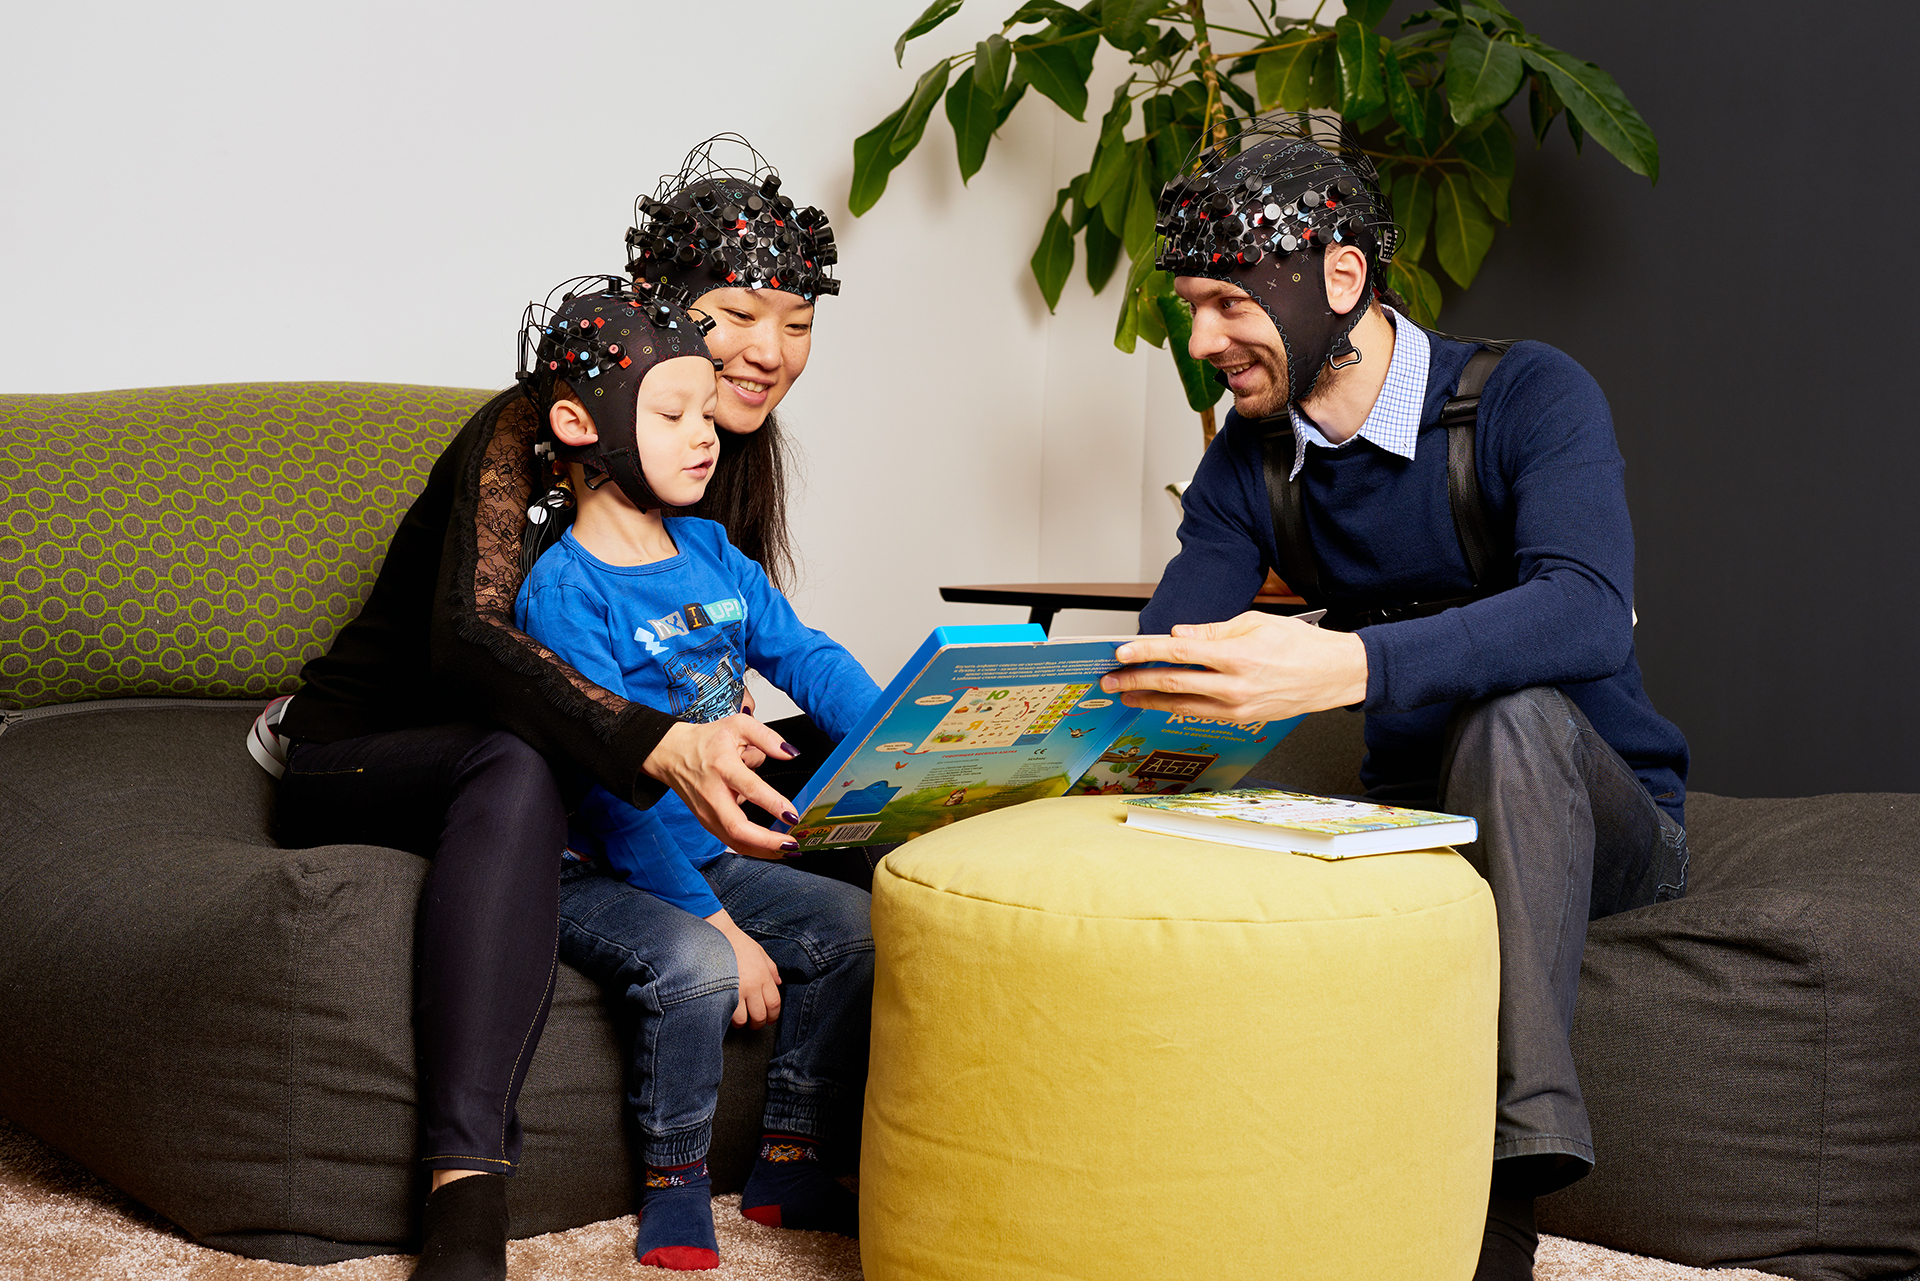 An image of parents reading a book to a child. Everyone is wearing EEG caps.